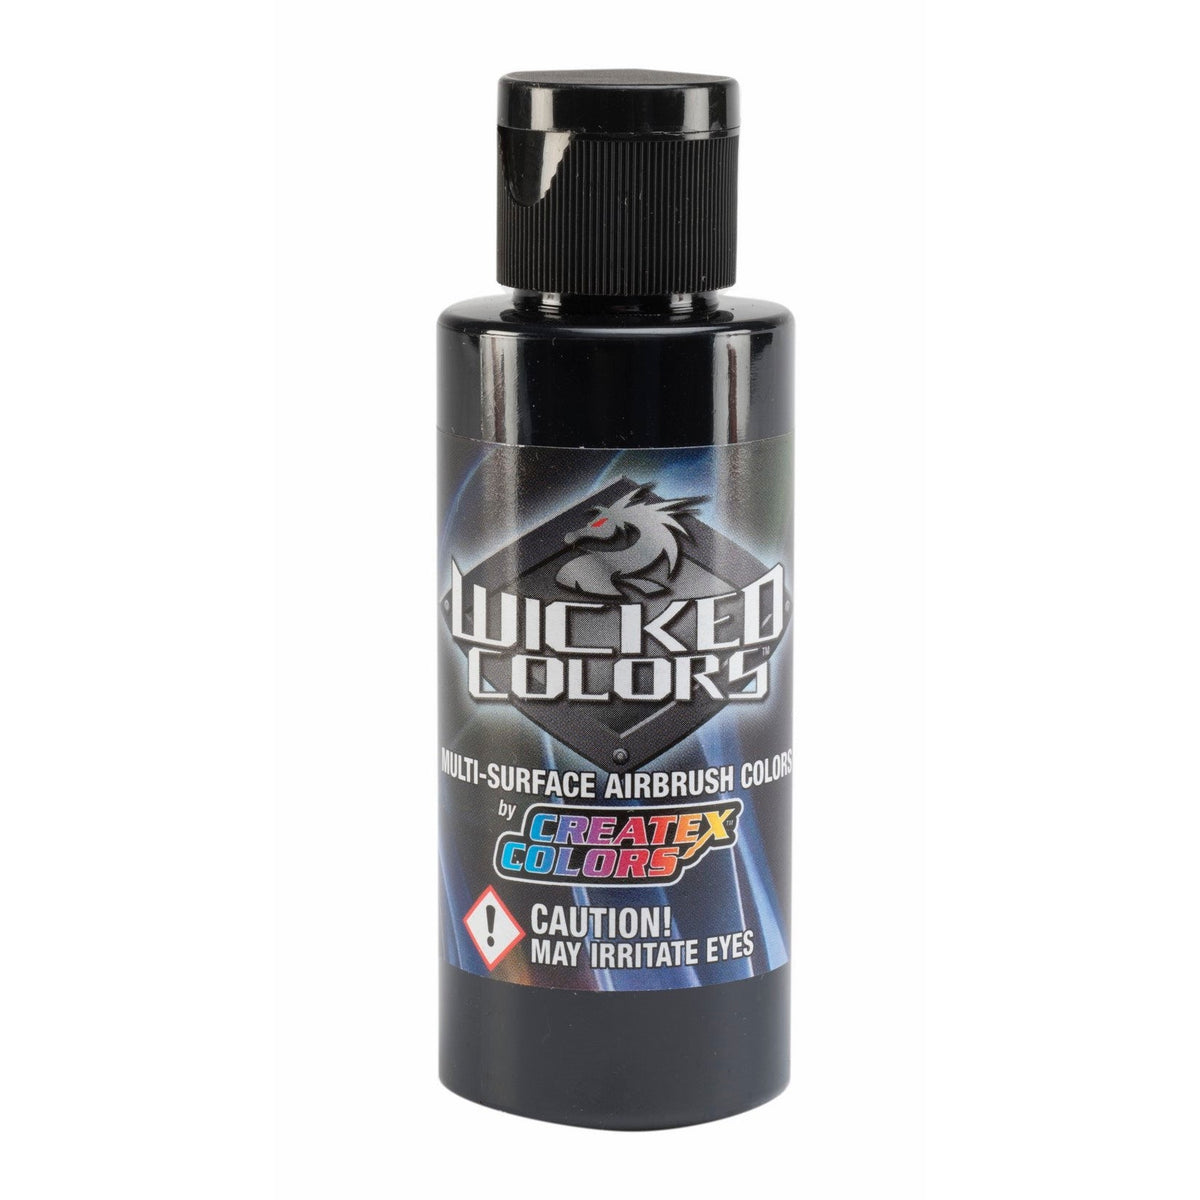 Wicked Multi-Surface Airbrush Colors - W051 Detail Black 8 oz - merriartist.com